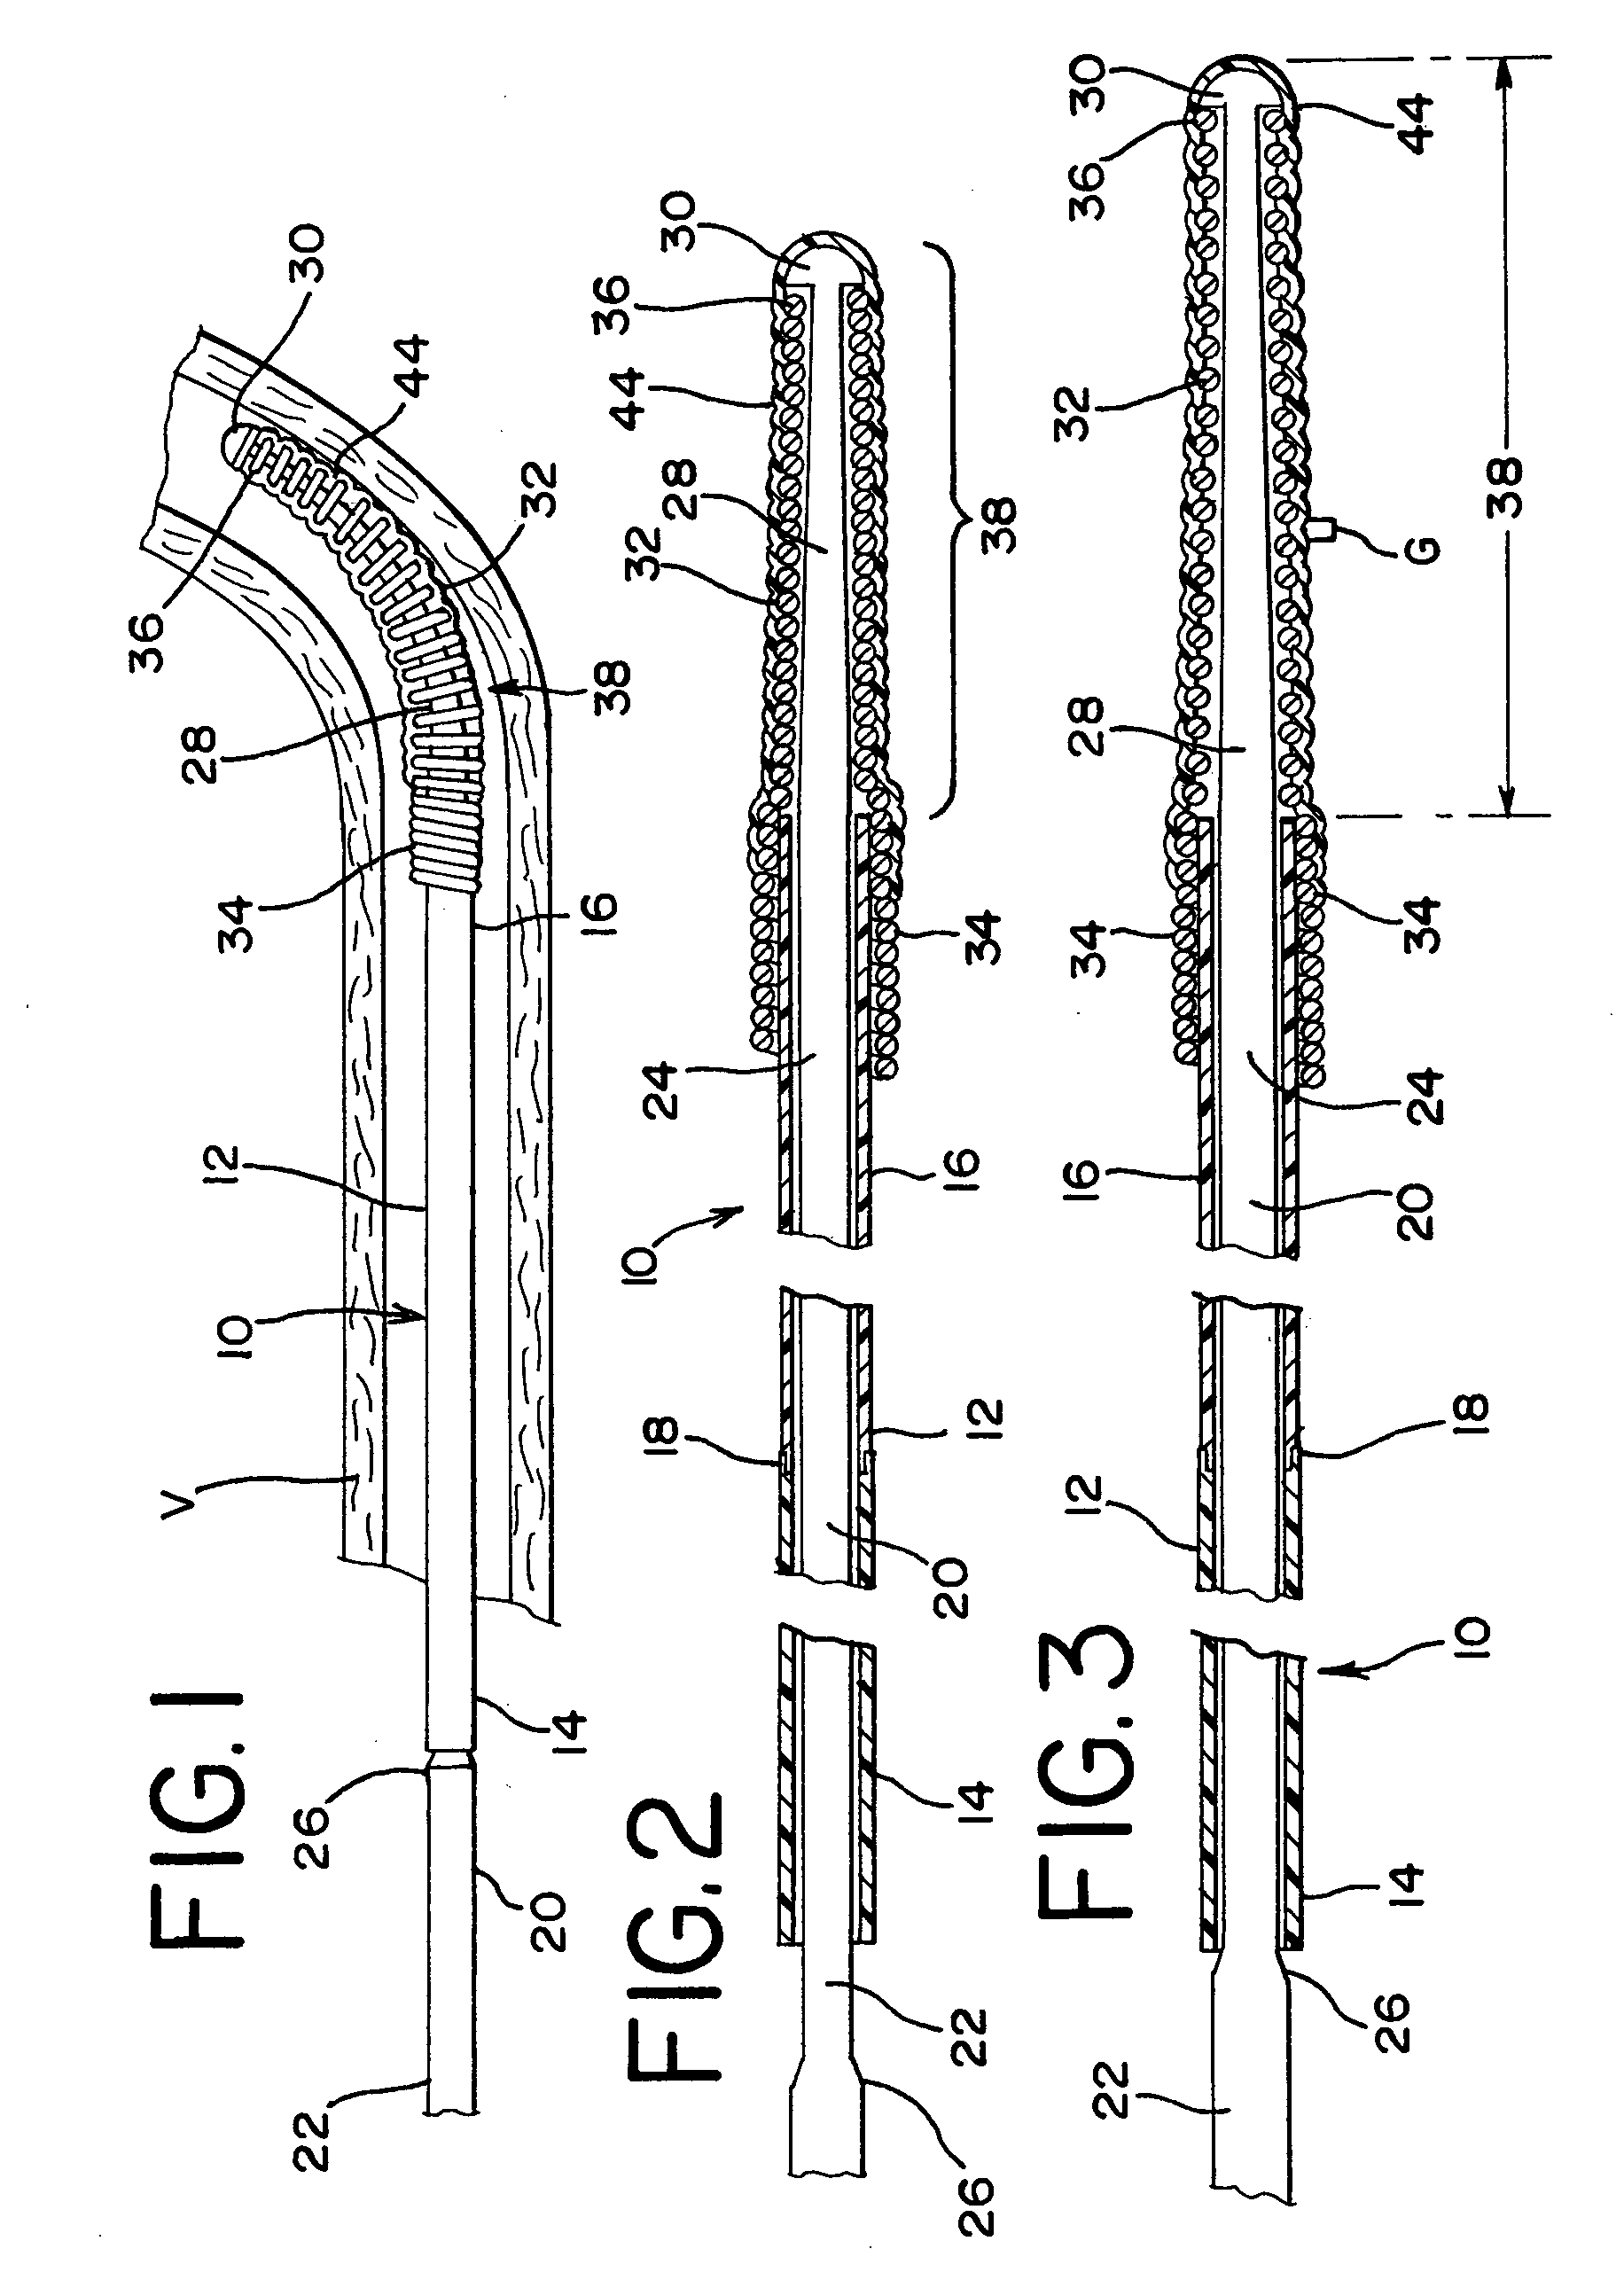 Variable stiffness guidewire